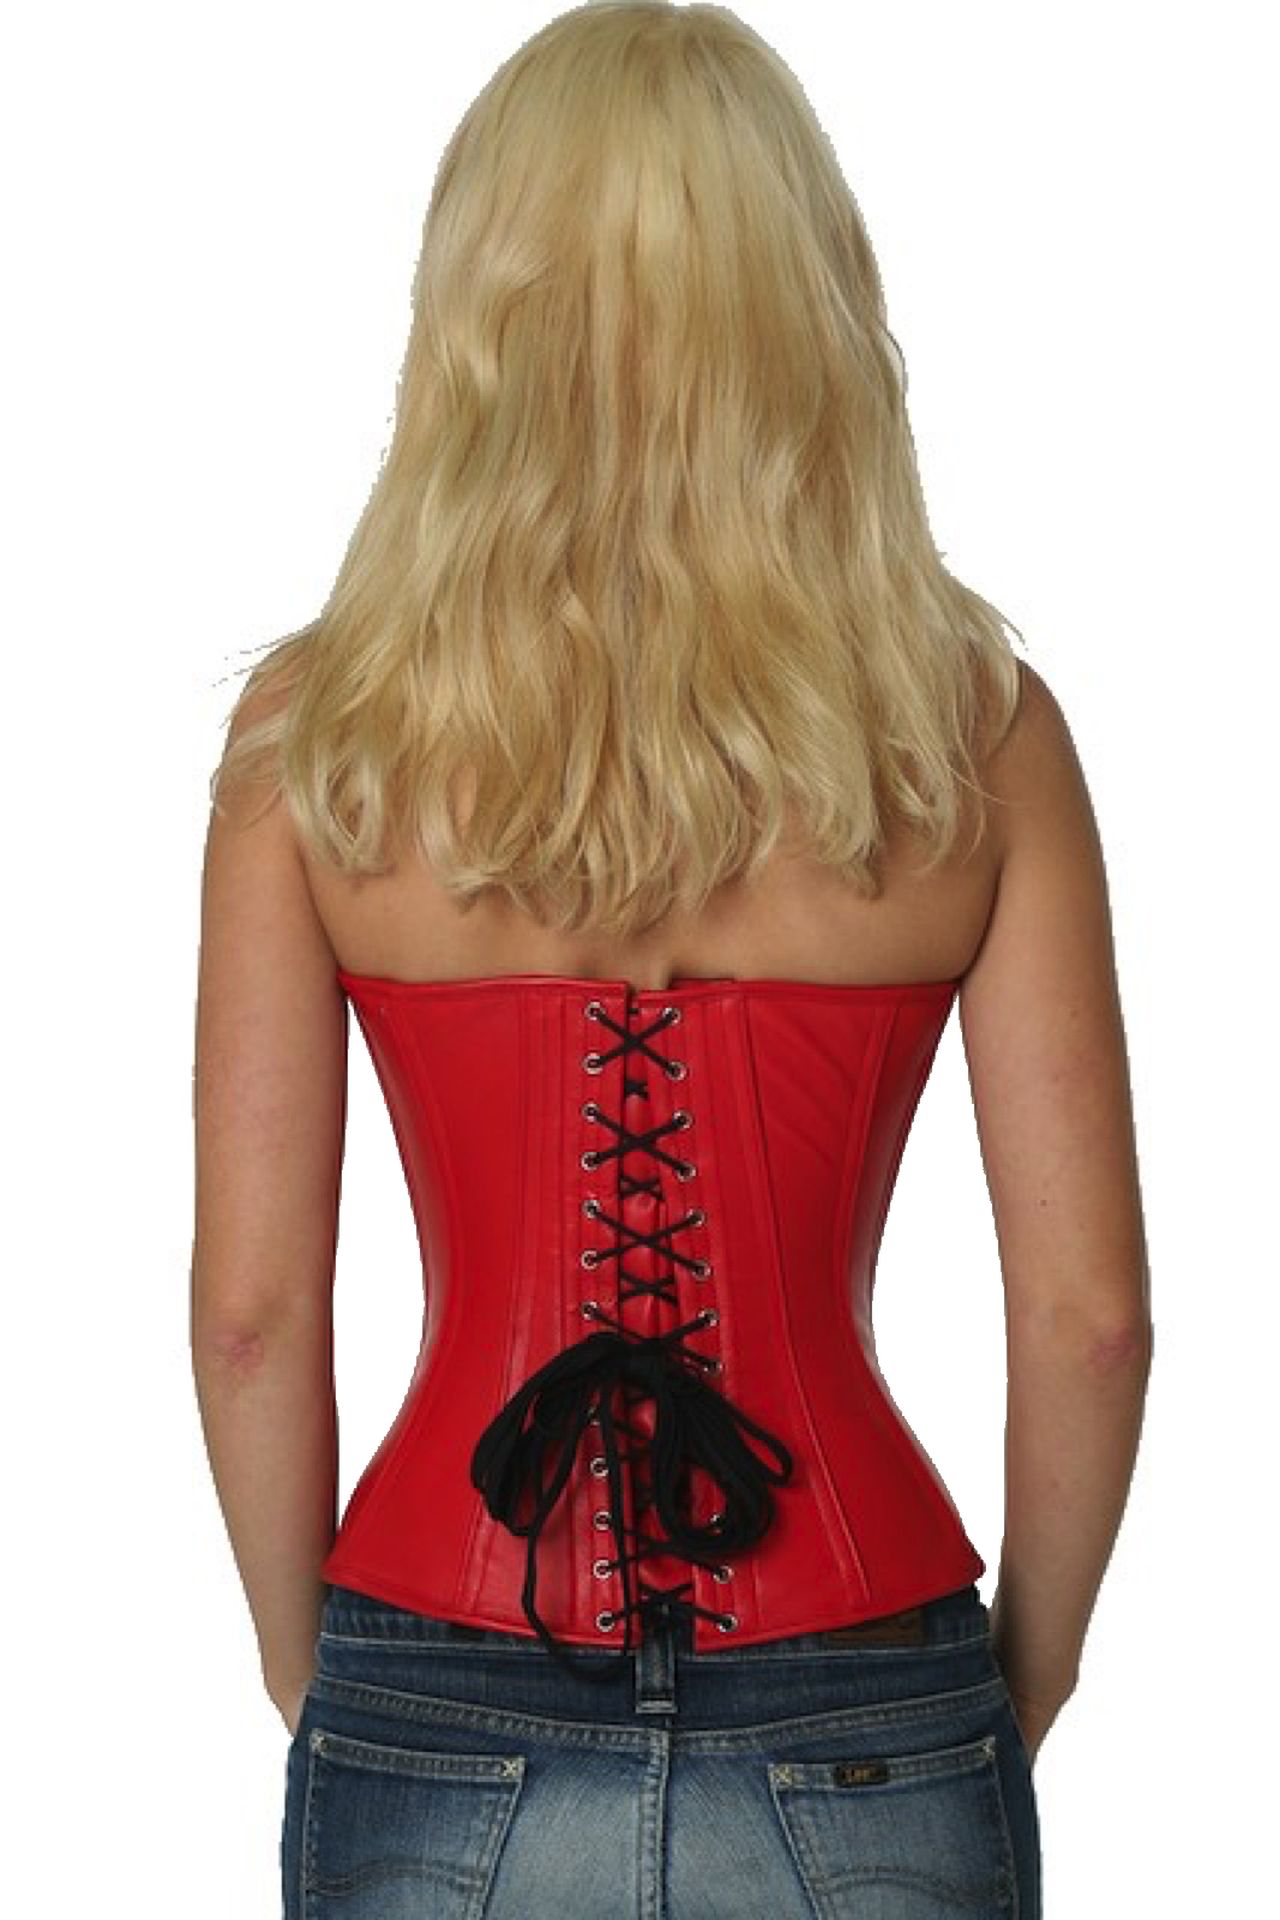 Corset red leather half bust lh23